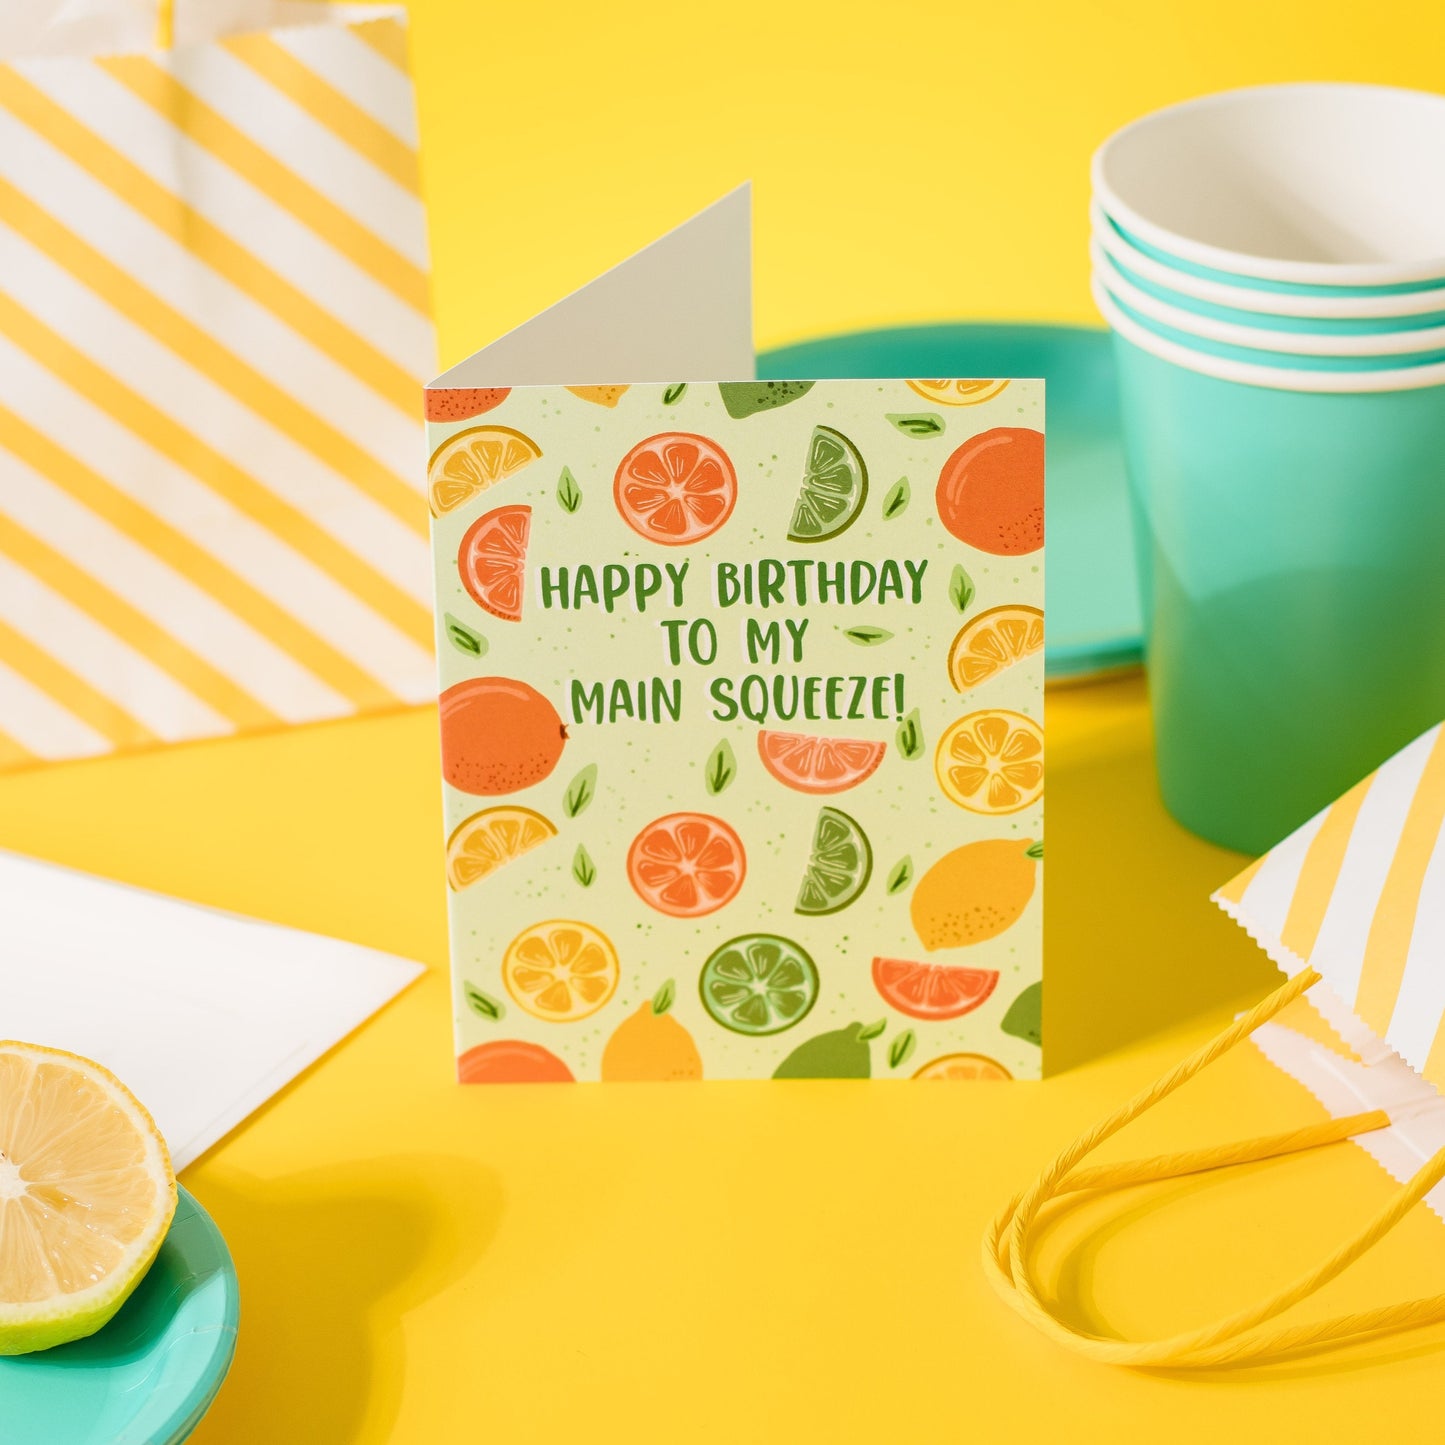 Happy Birthday To My Main Squeeze! - Greeting Card